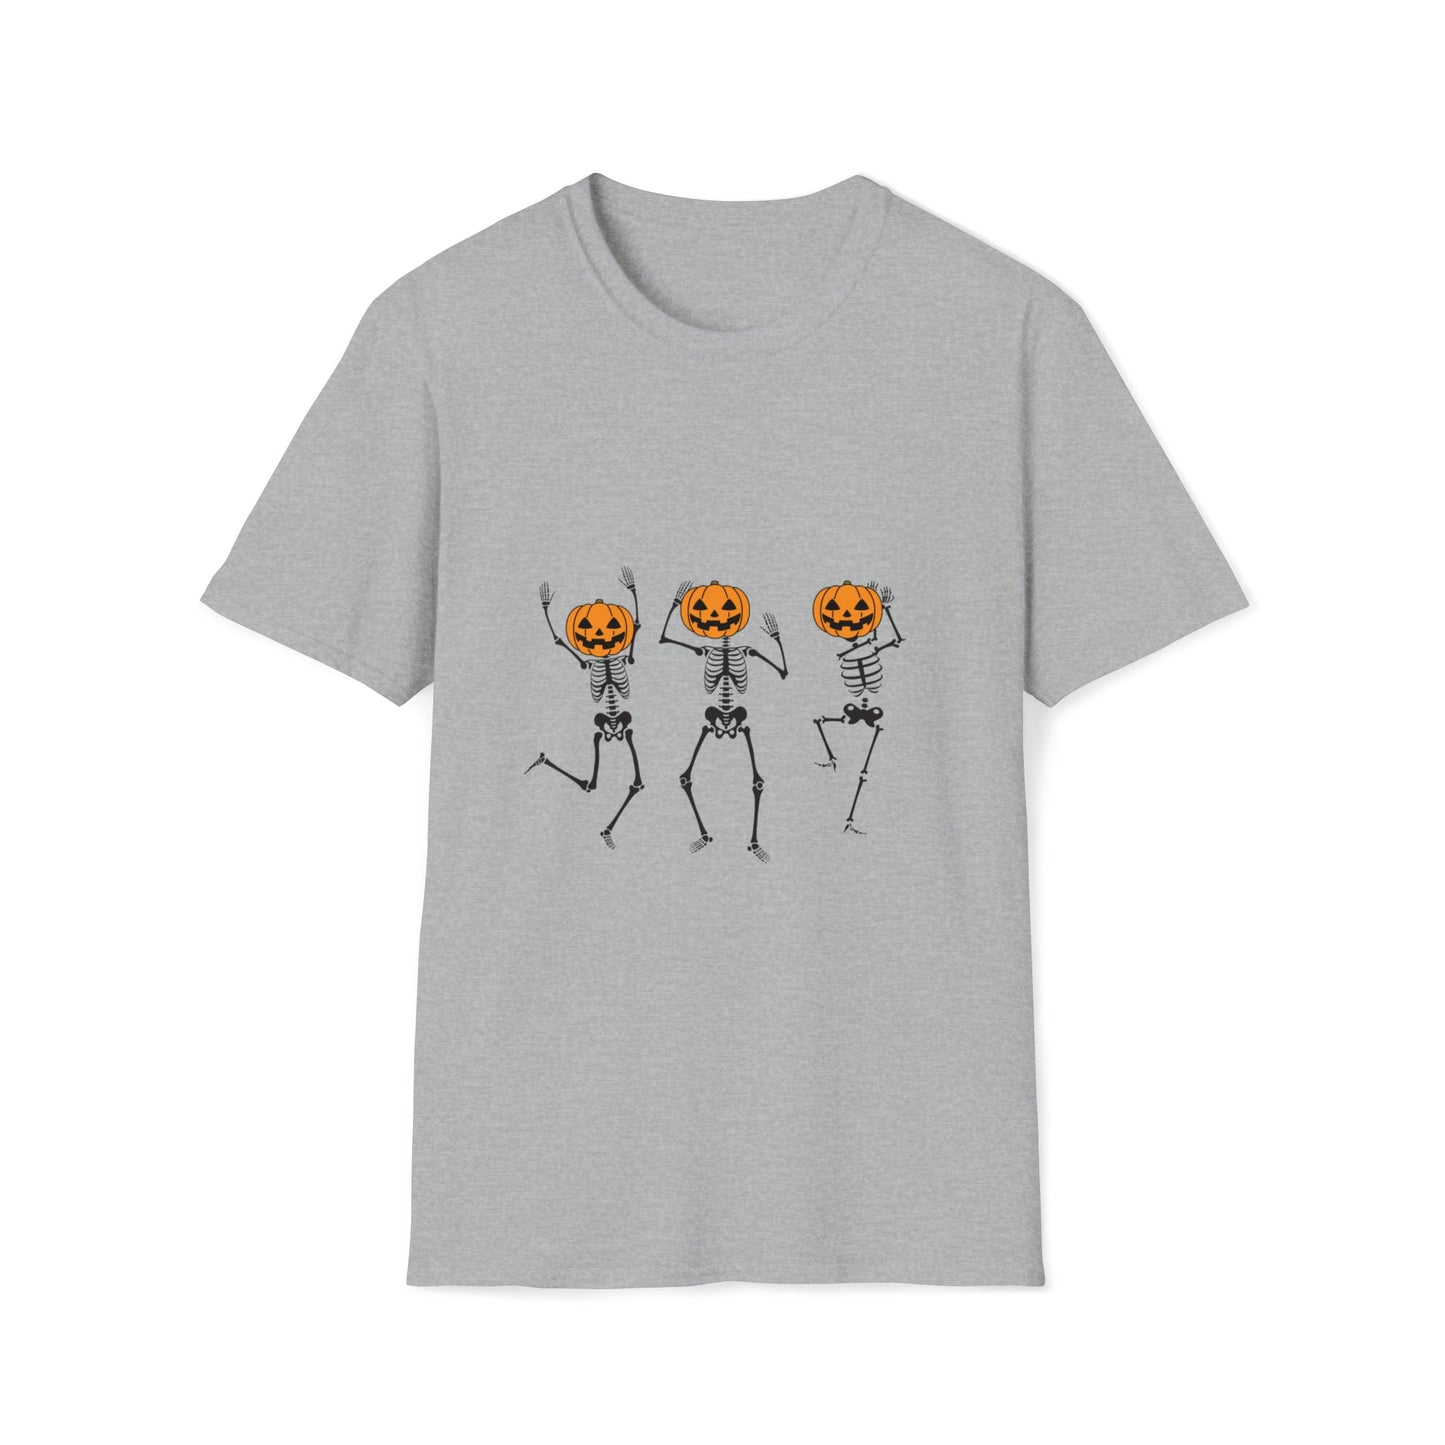 Get trendy with Dancing Skeletons  T-Shirt - T-Shirt available at Good Gift Company. Grab yours for $18.95 today!